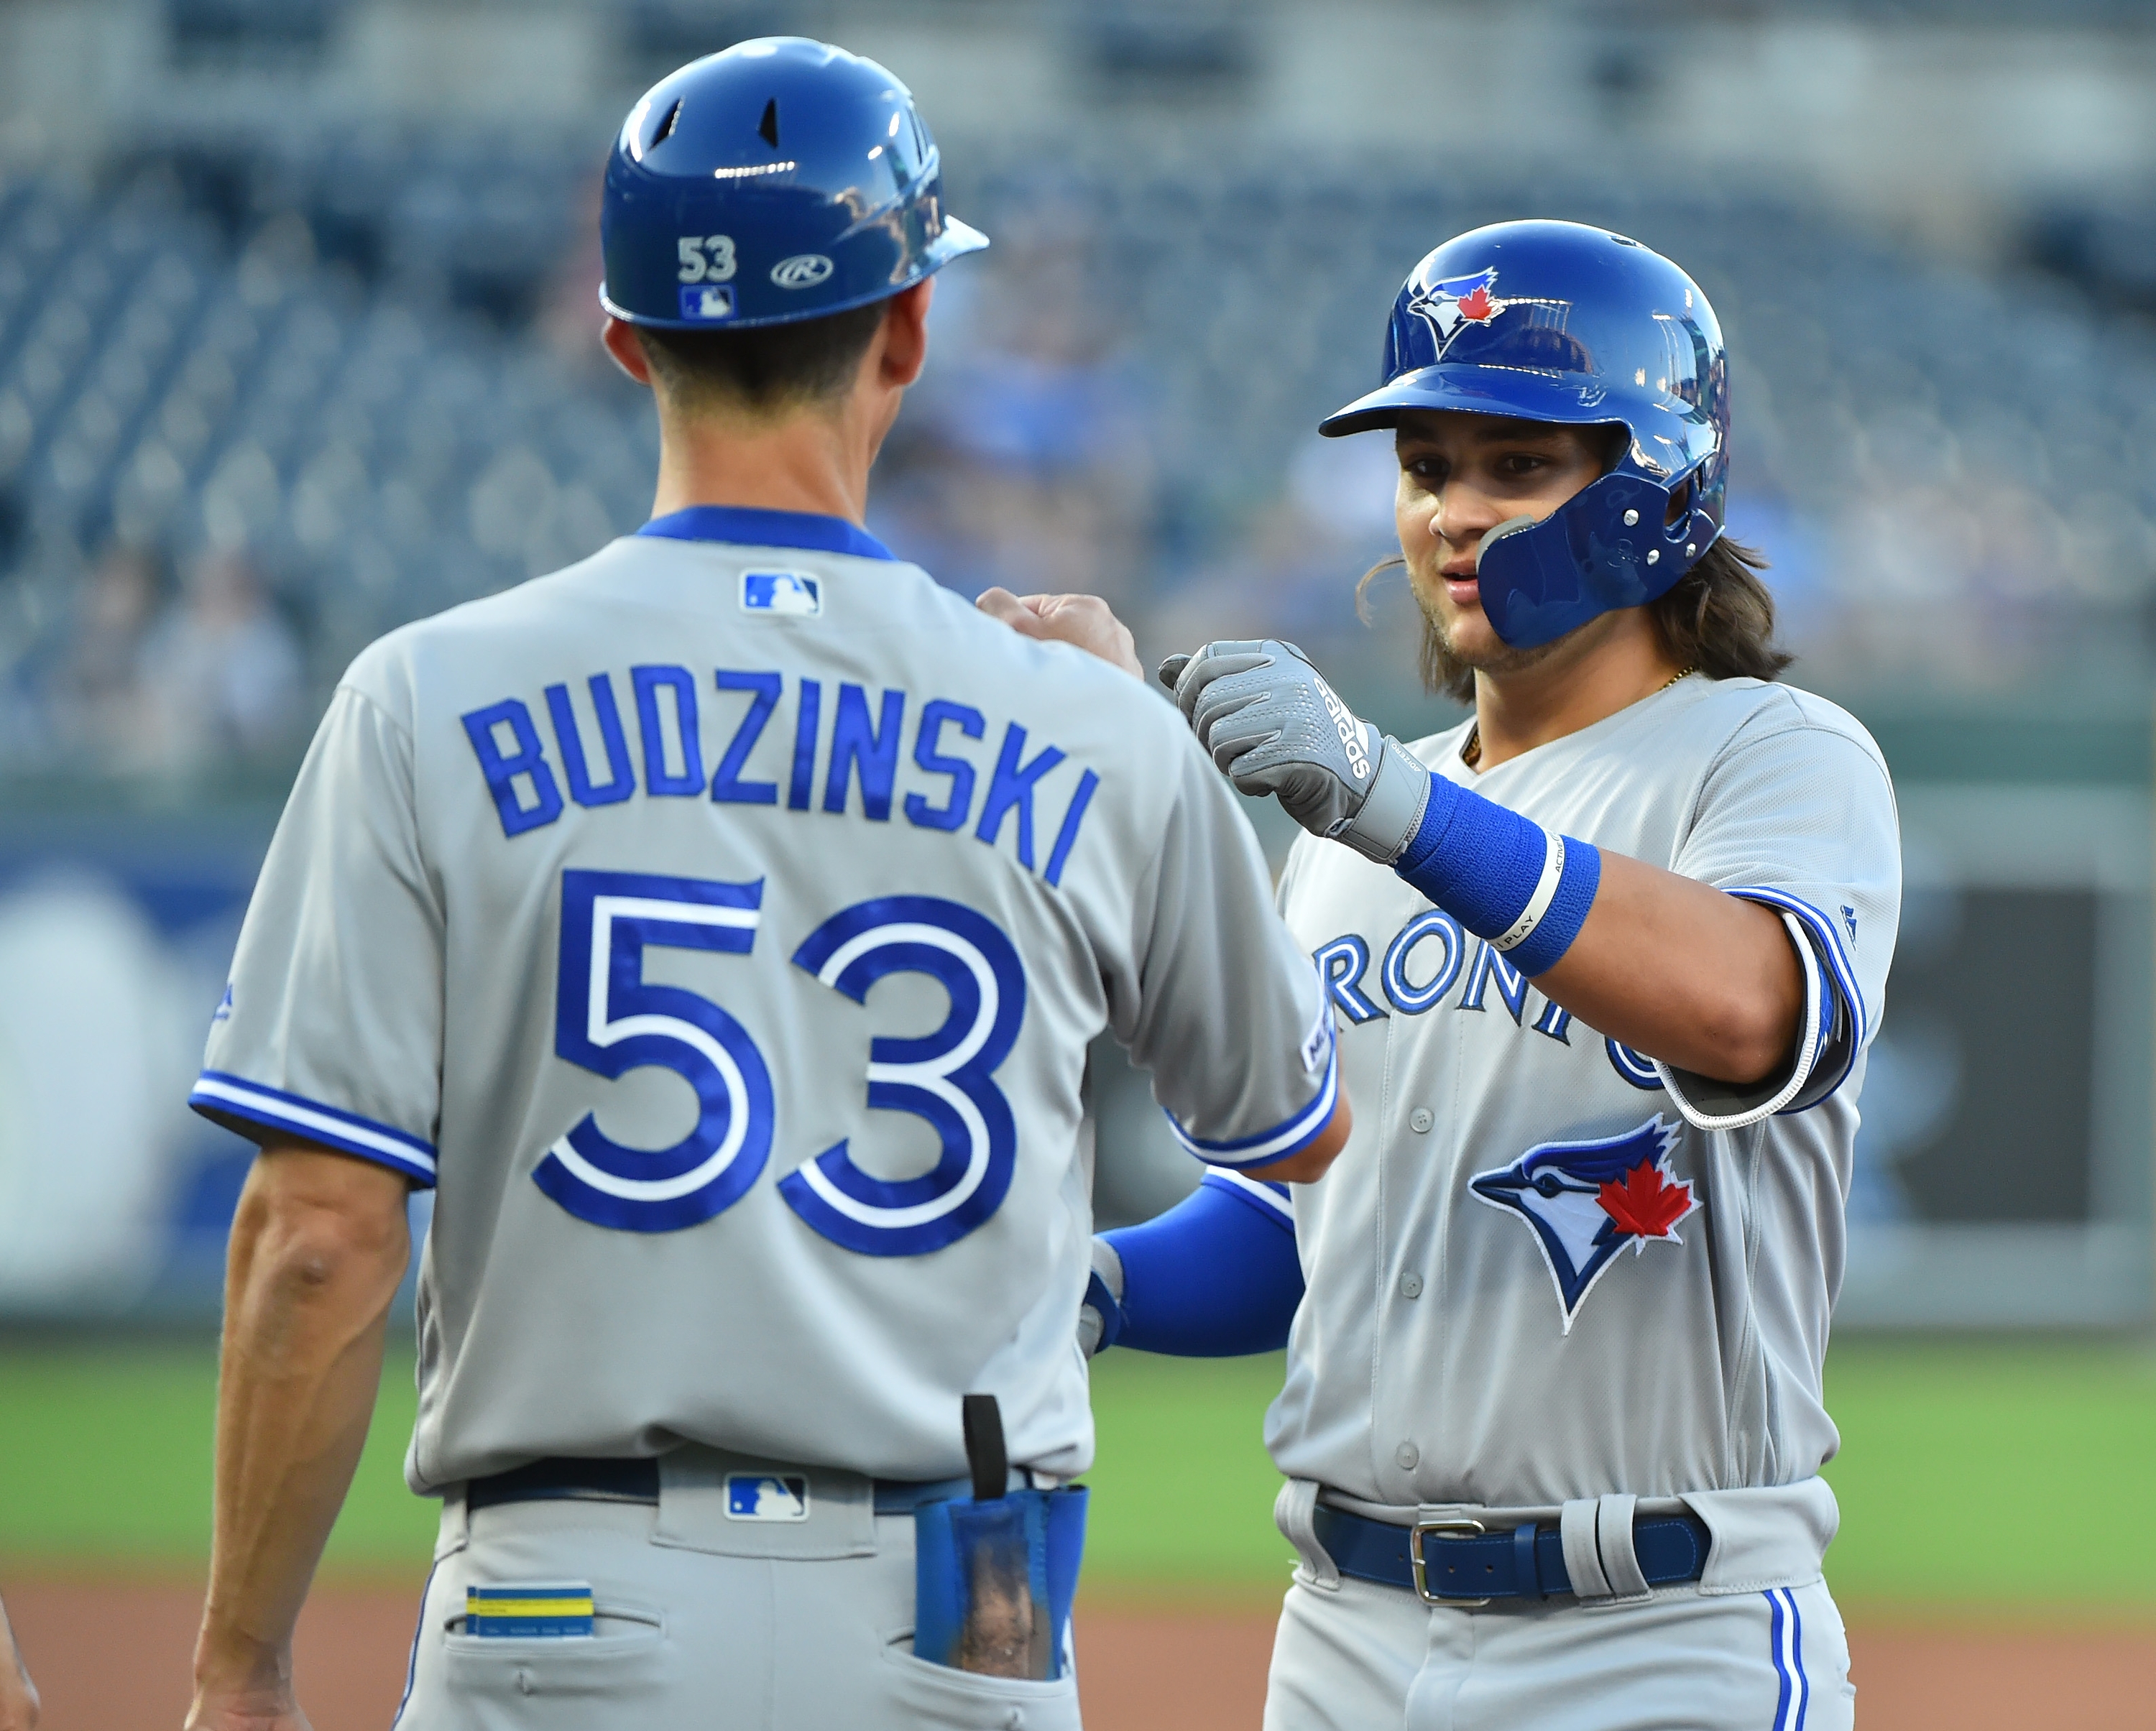 Bichette gets a hit, joins his junior Jays buddies for win against Royals